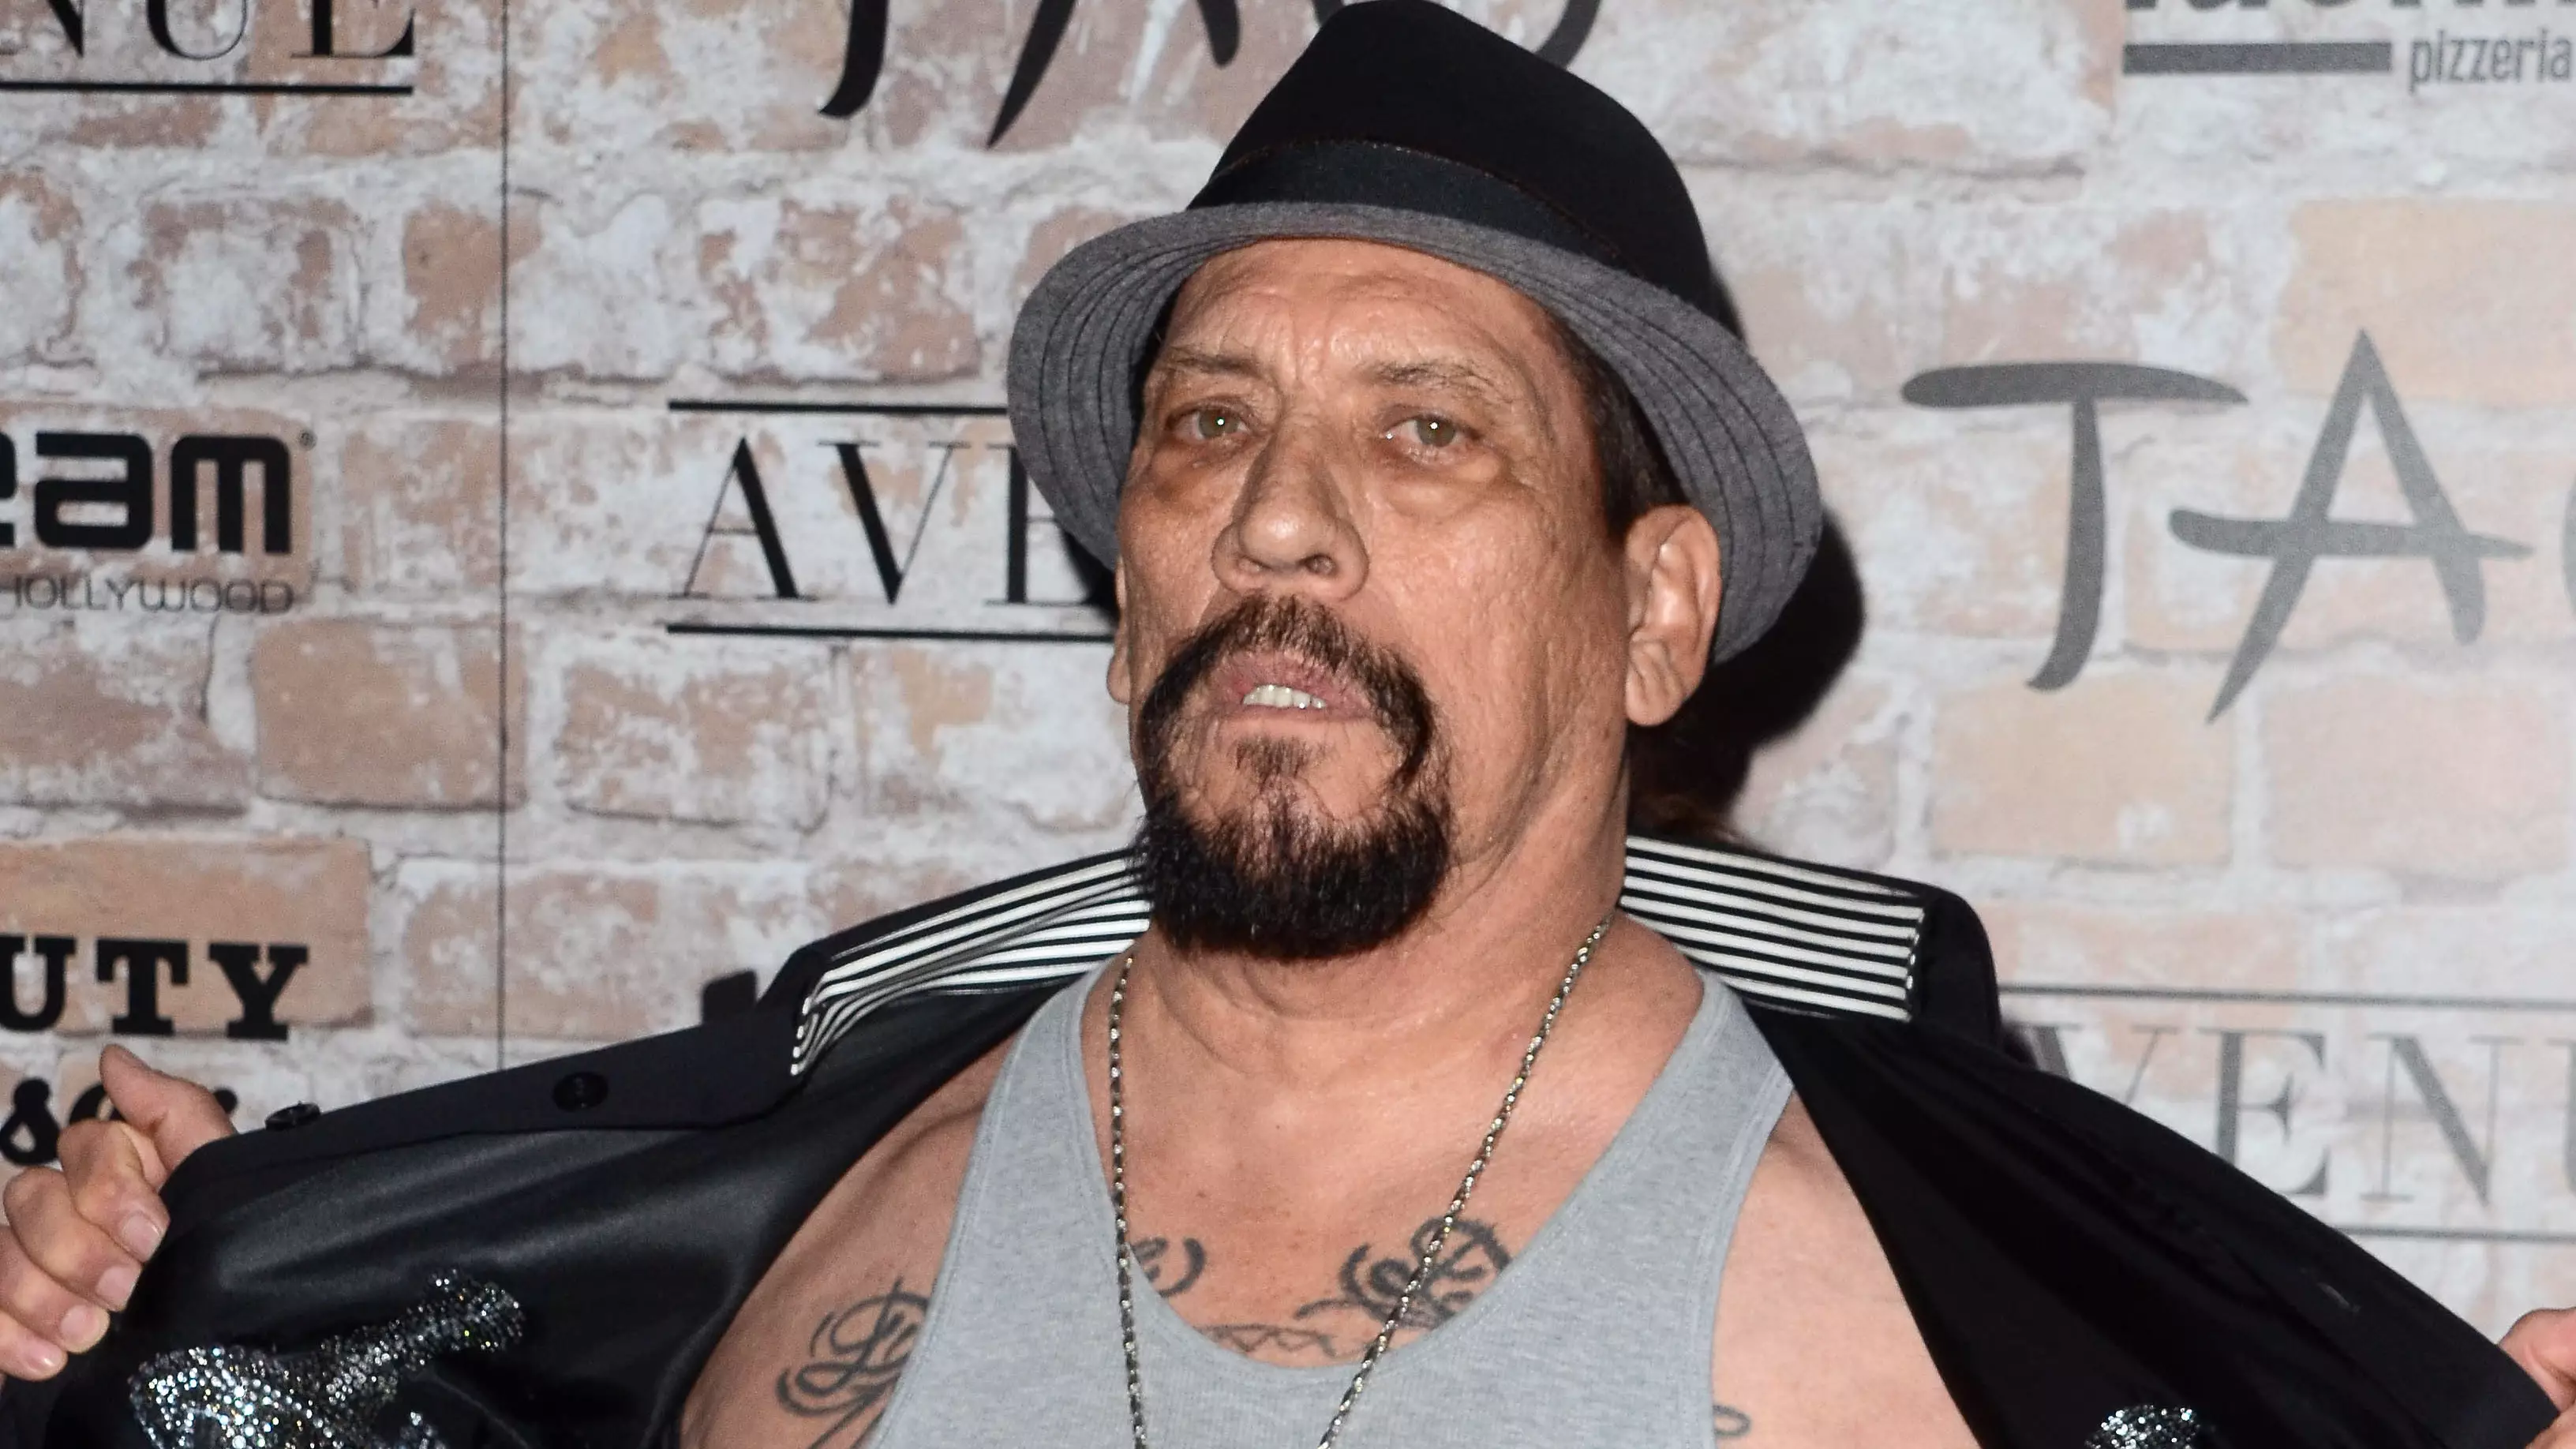 Danny Trejo - The Convict Who Ditched A Life Of Crime For The Big Screen